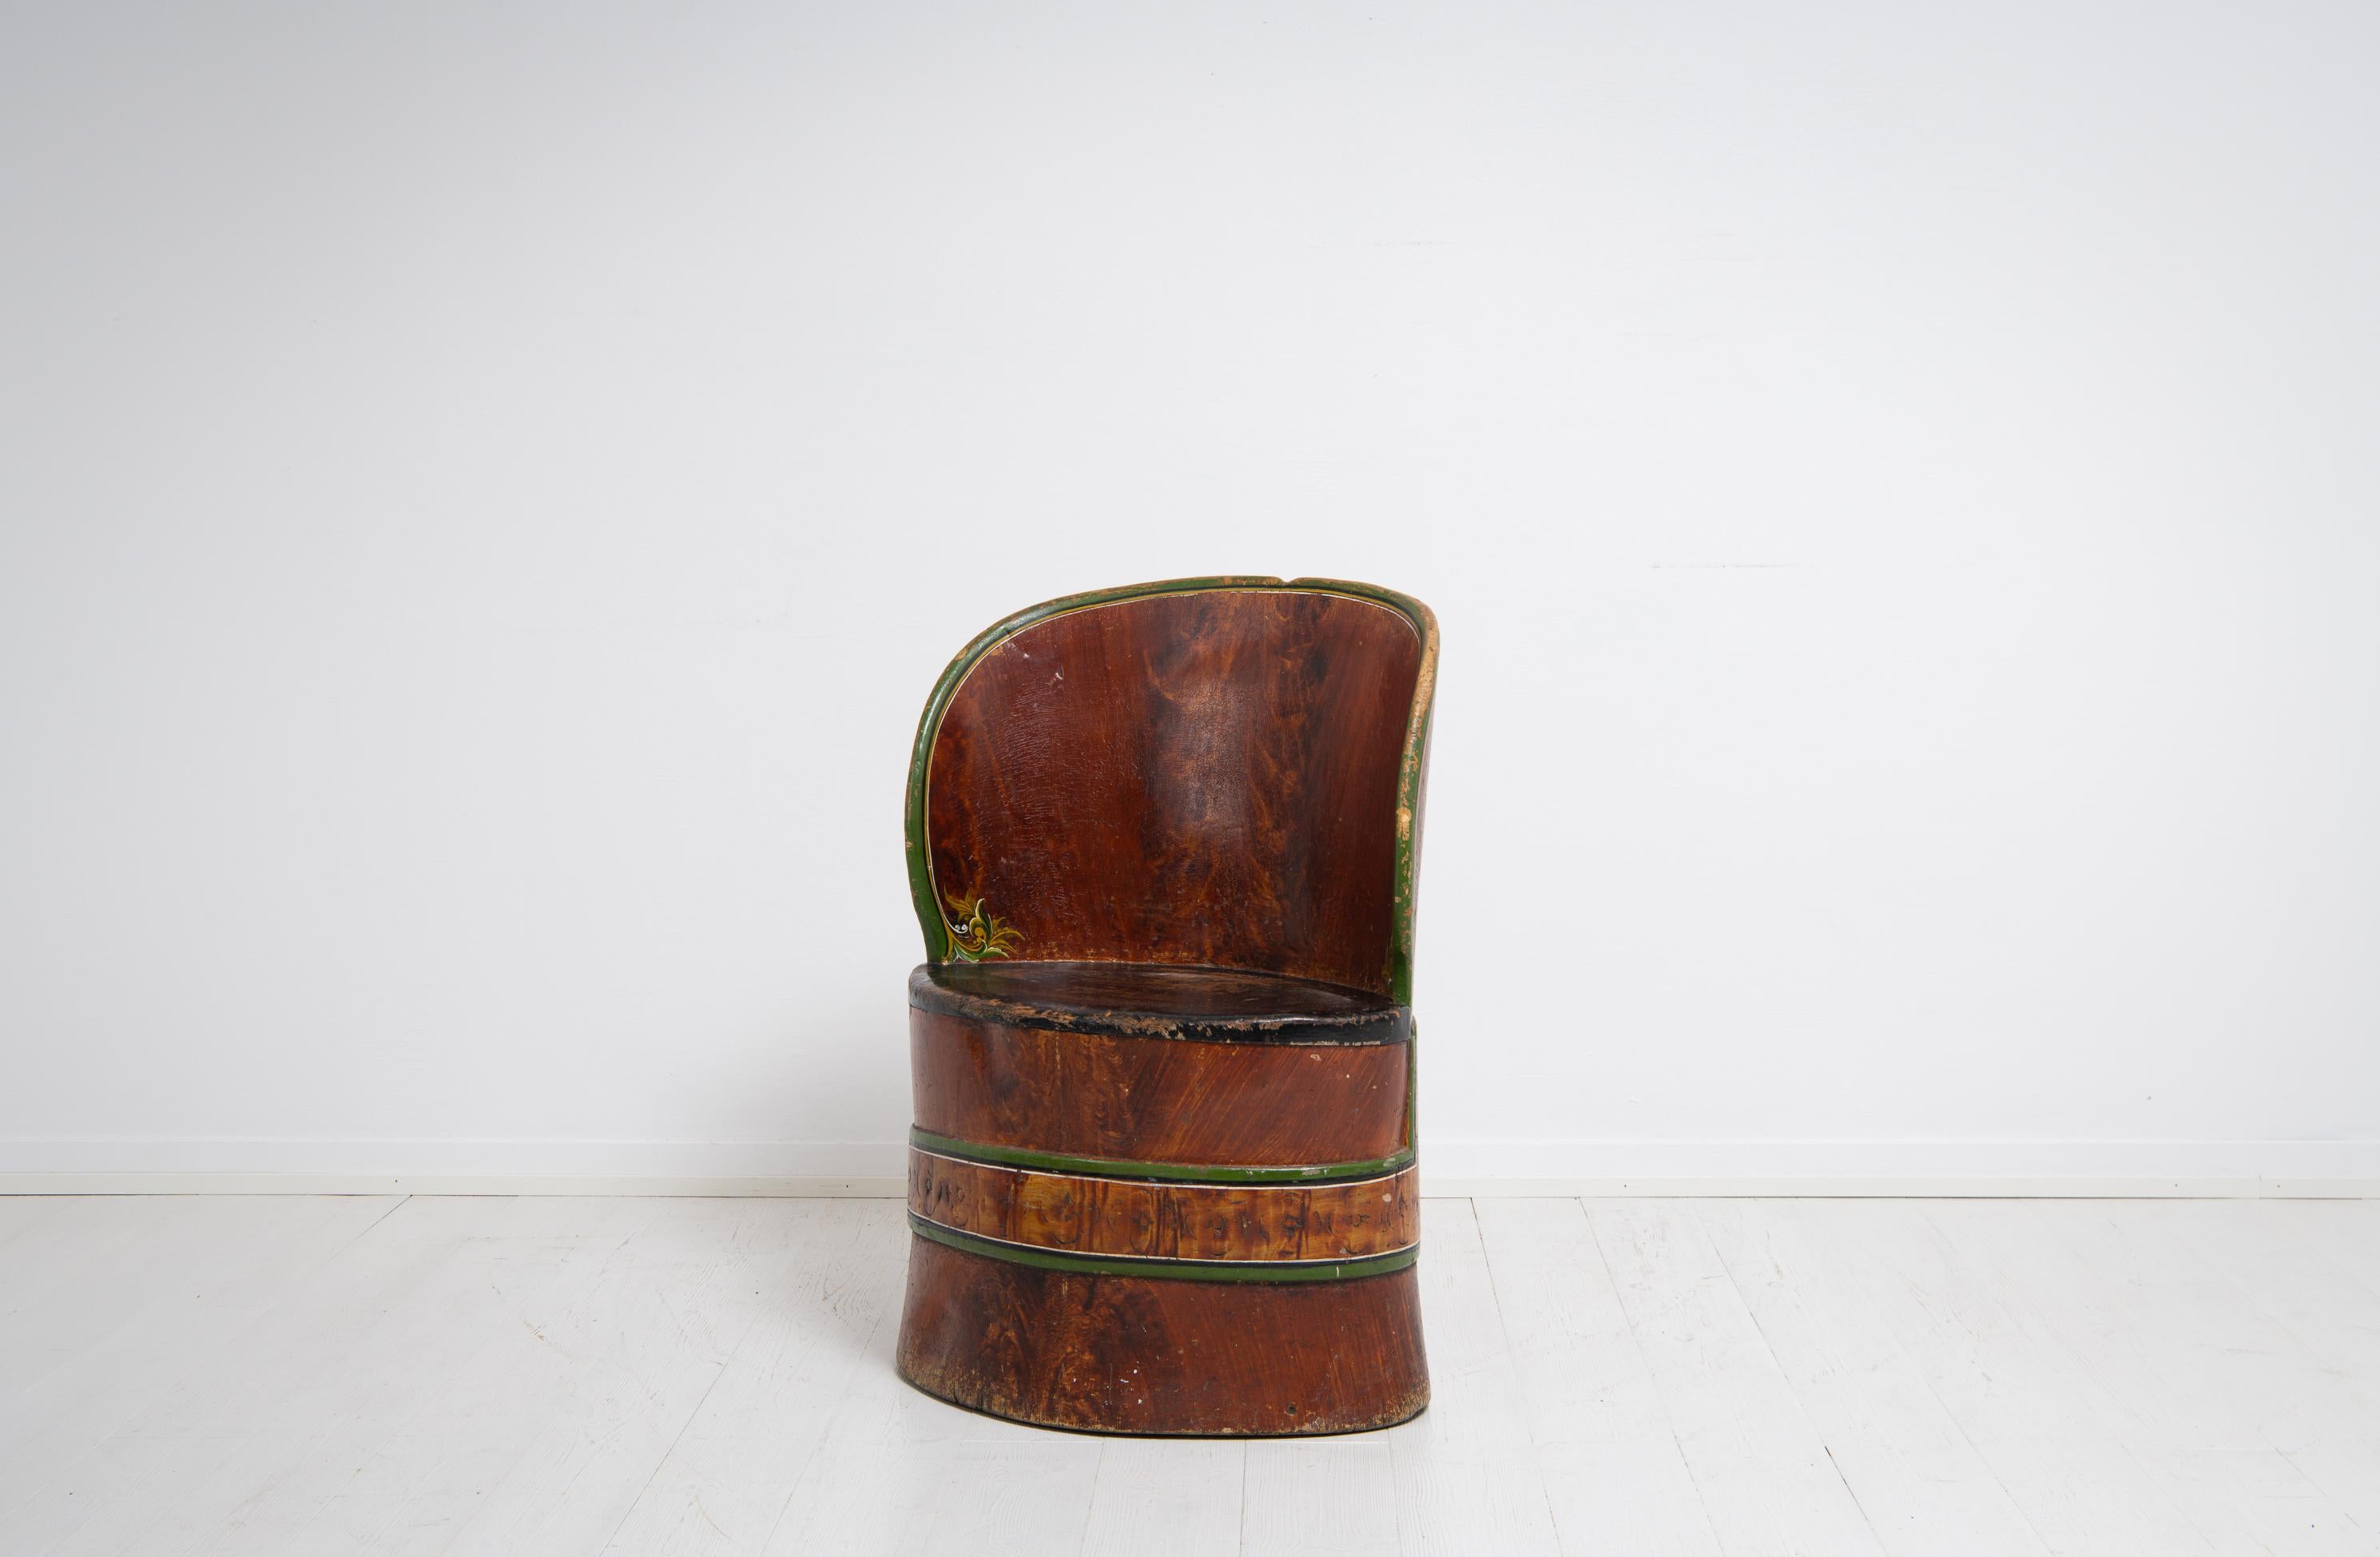 Swedish folk art stump chair made during the mid 1800s. The stump chair is a primitive chair made from an hollowed tree stump and this one has paint from the 1800s. It has some marks of distress and wear after use but is in otherwise good condition.